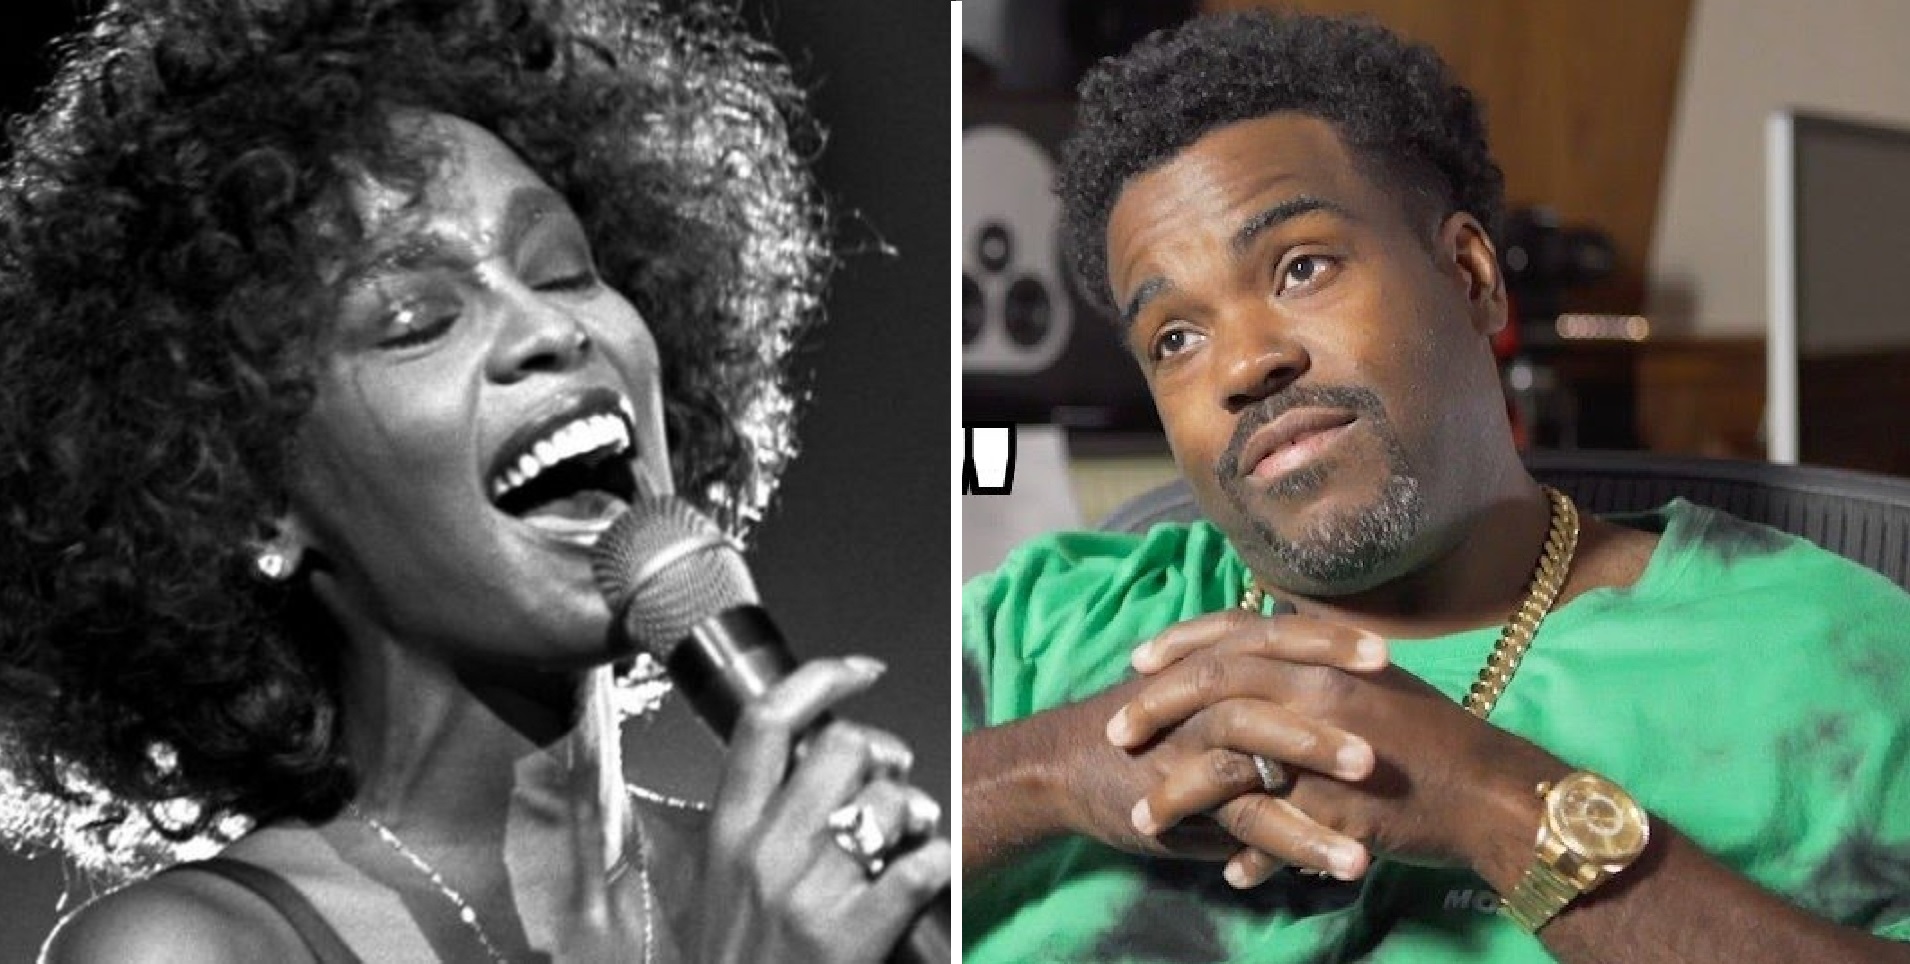 Producer Darkchild Brings To Life Old Whitney Houston Performance In Sensational NEW SONG [Listen]